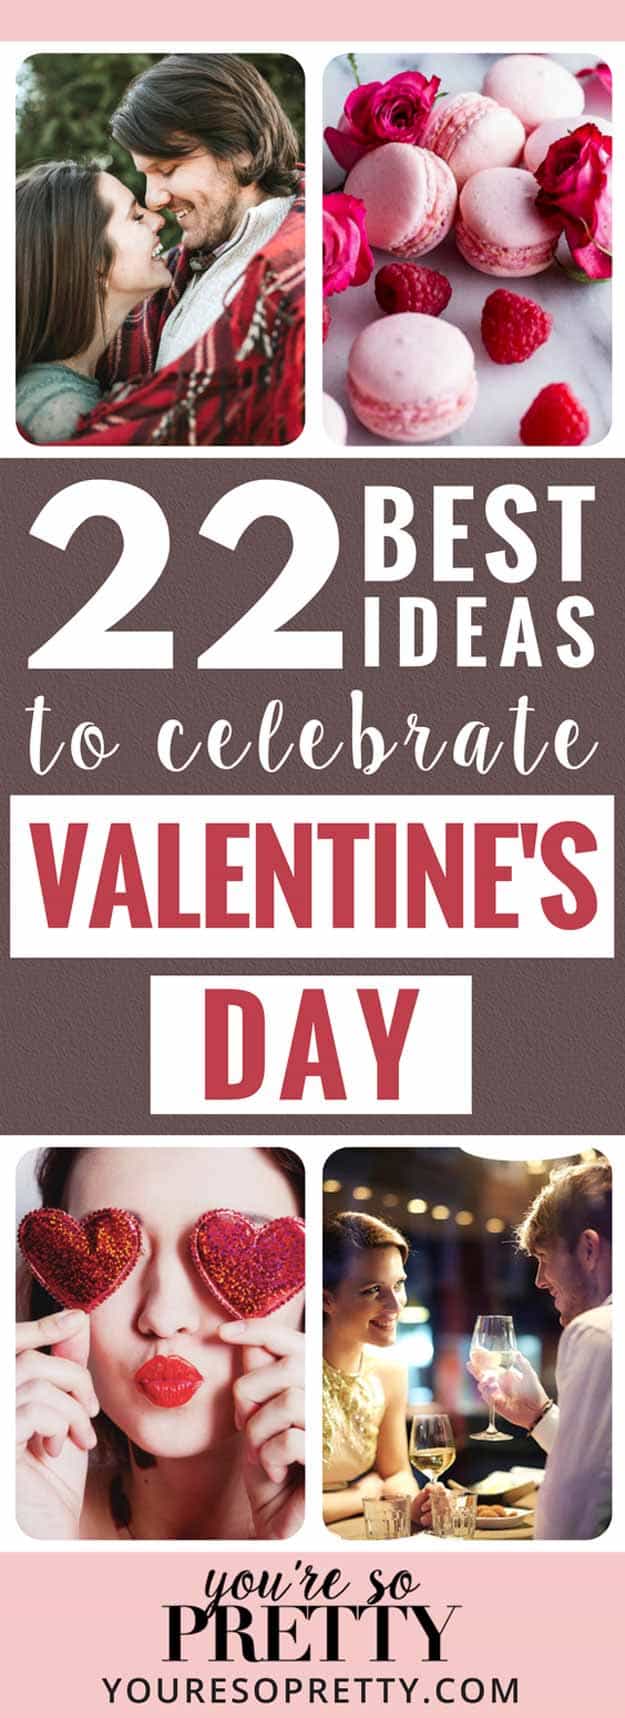 Girl's Guide To Valentine's Day Ideas